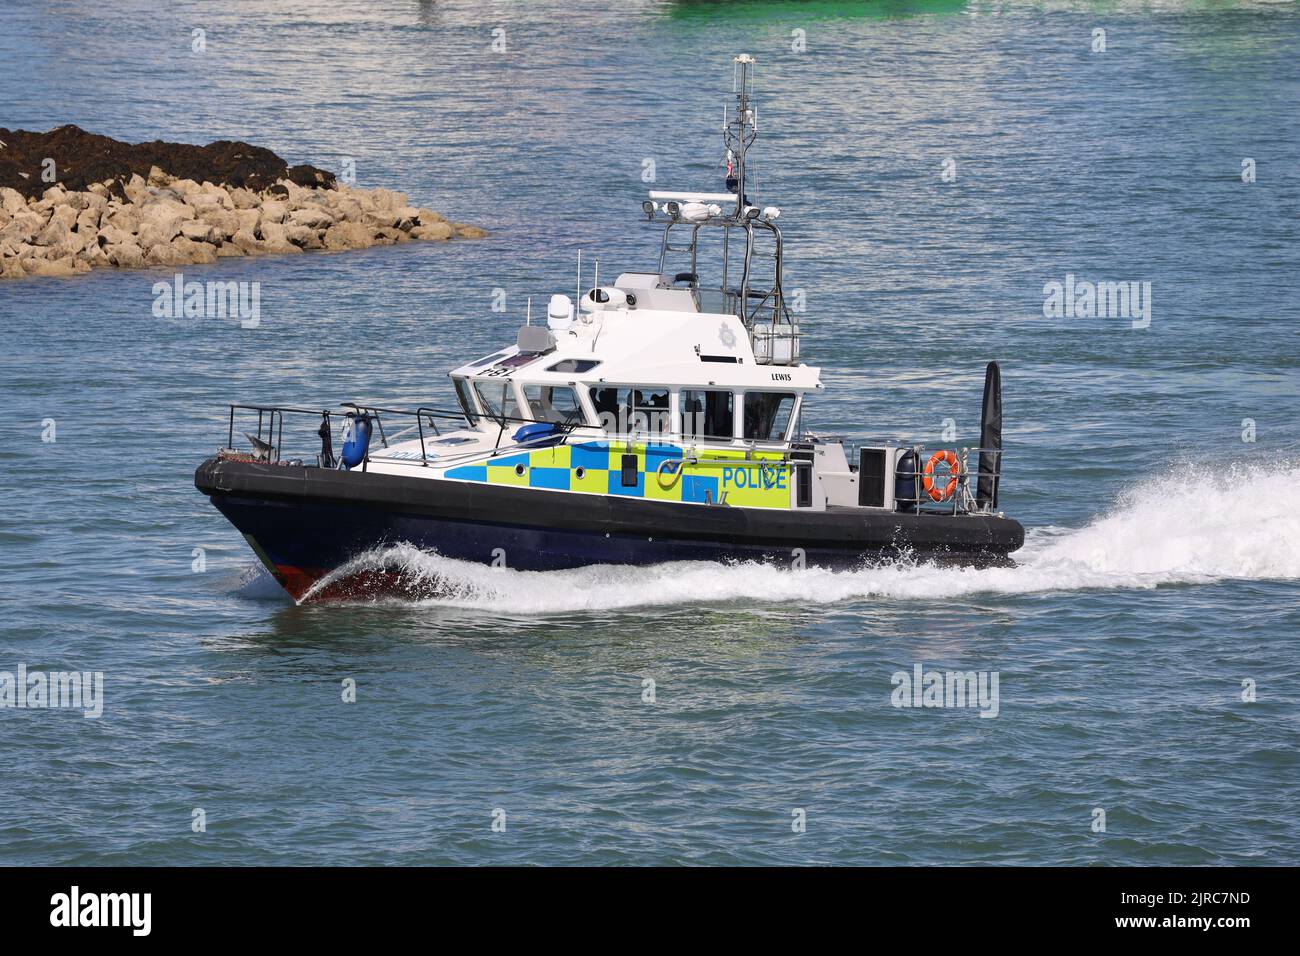 The Ministry of Defence police launch LEWIS heading towards the harbour mouth Stock Photo